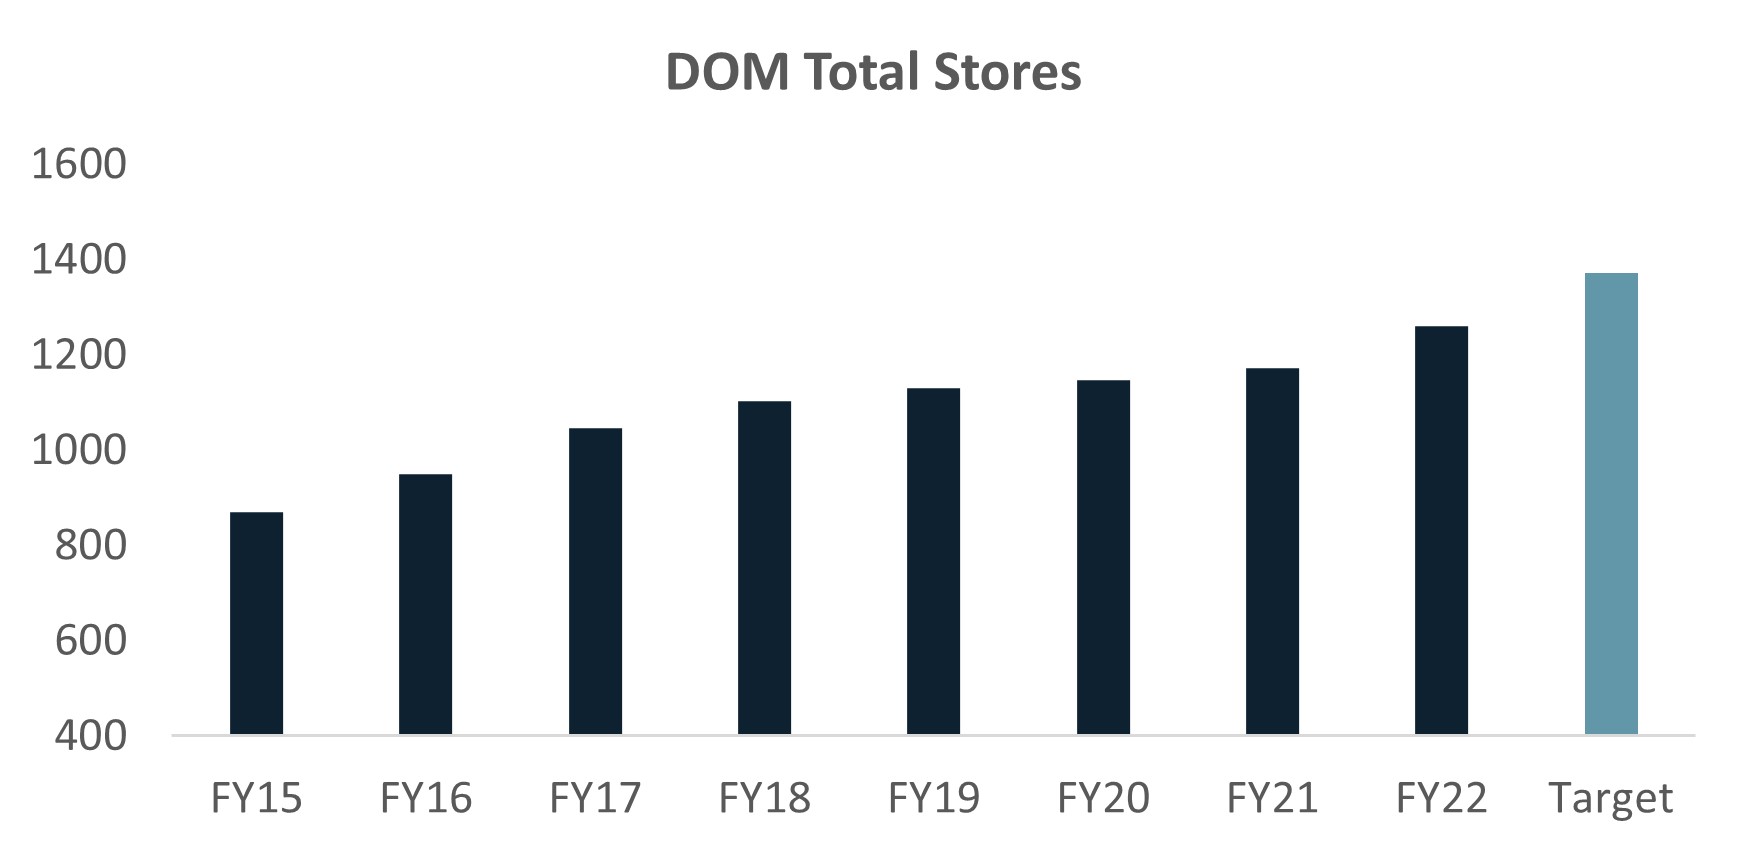 Source: Domino’s Pizza Group Annual Reports, Totus Capital